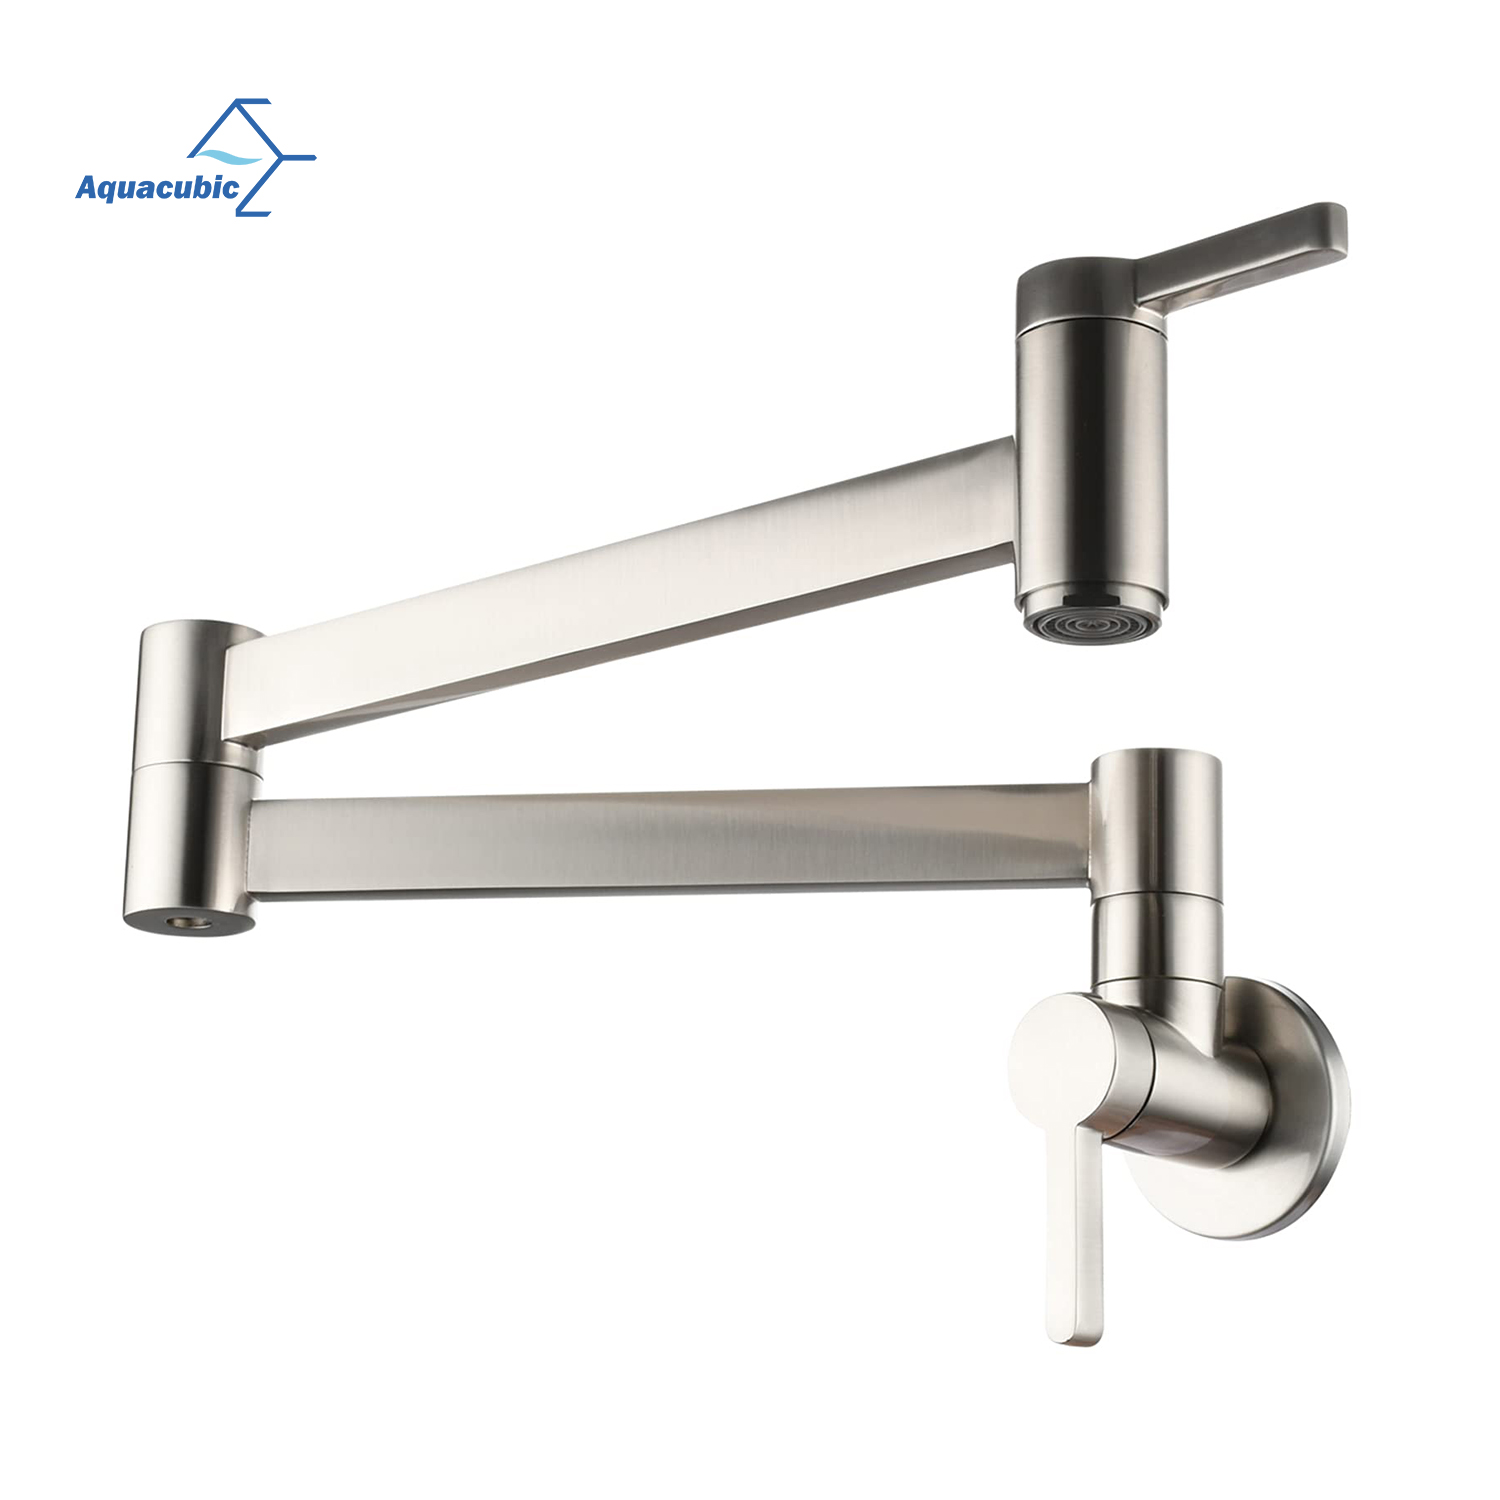 Aquacubic Pot Filler Kitchen Faucet, Brushed Nickel Wall Mount Pot Faucet with Folding Arms for Kitchen Sink